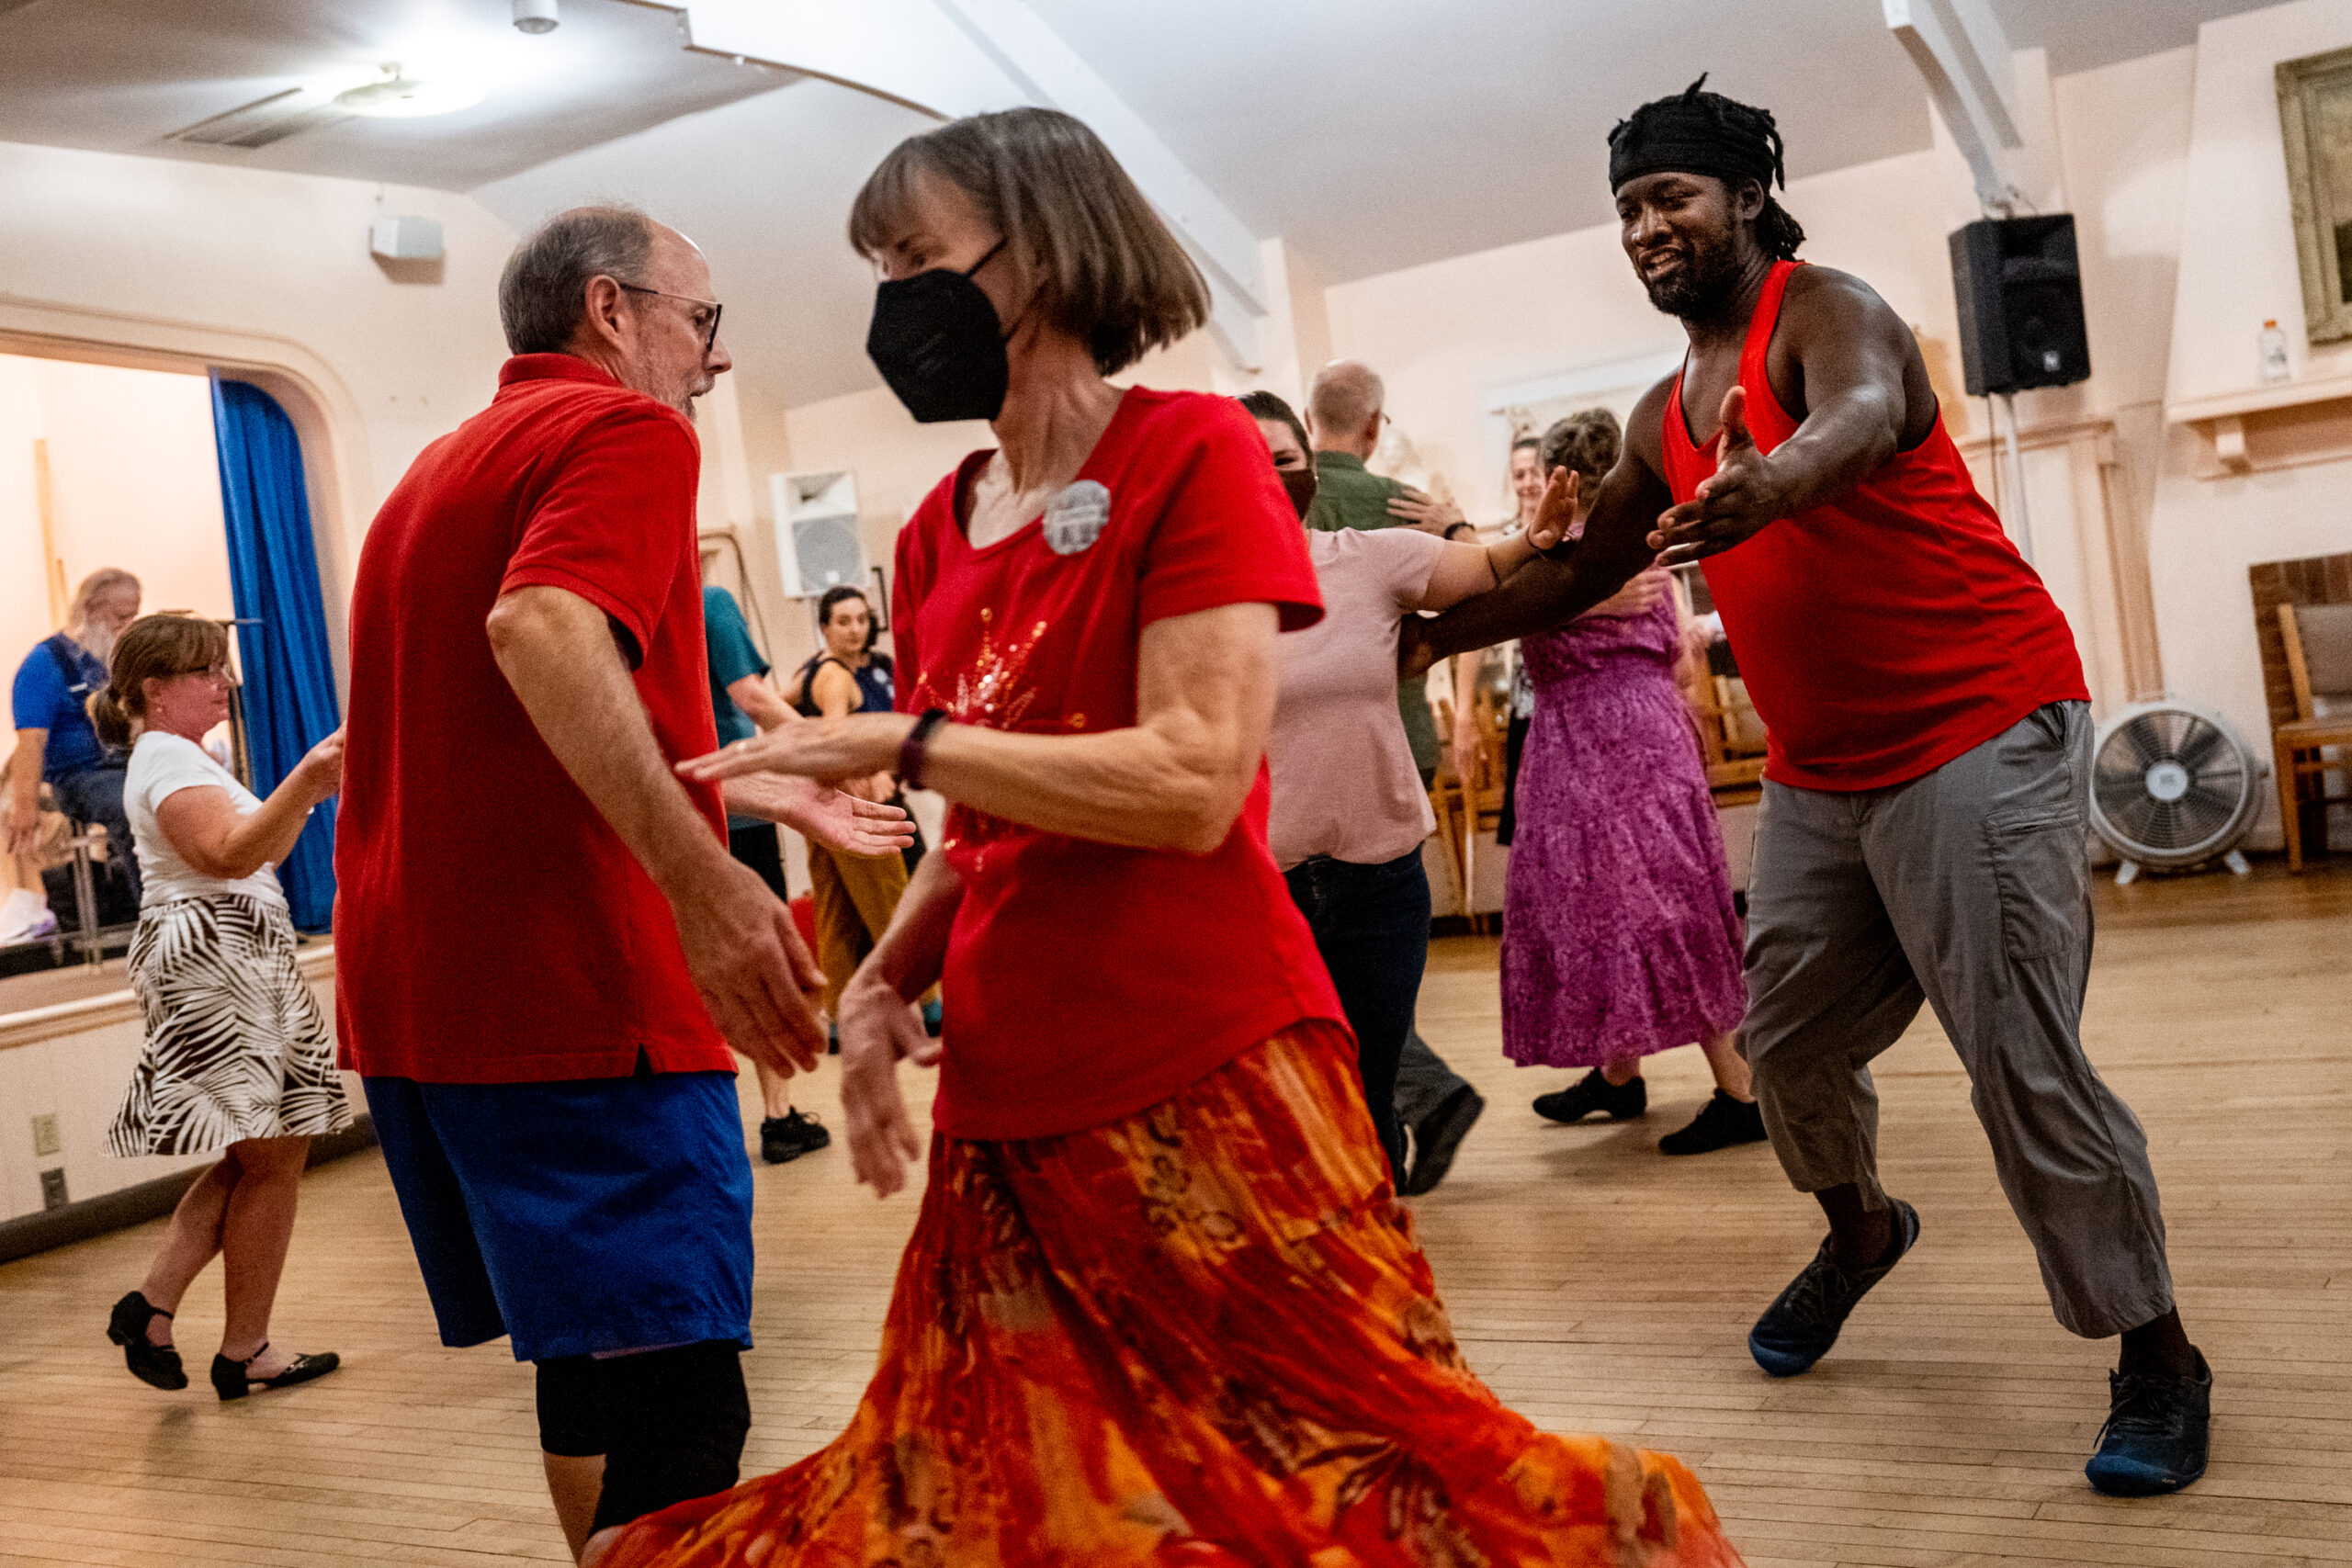 A Black man in his early 40s wearing a red shirt reaches out to a dance partner.